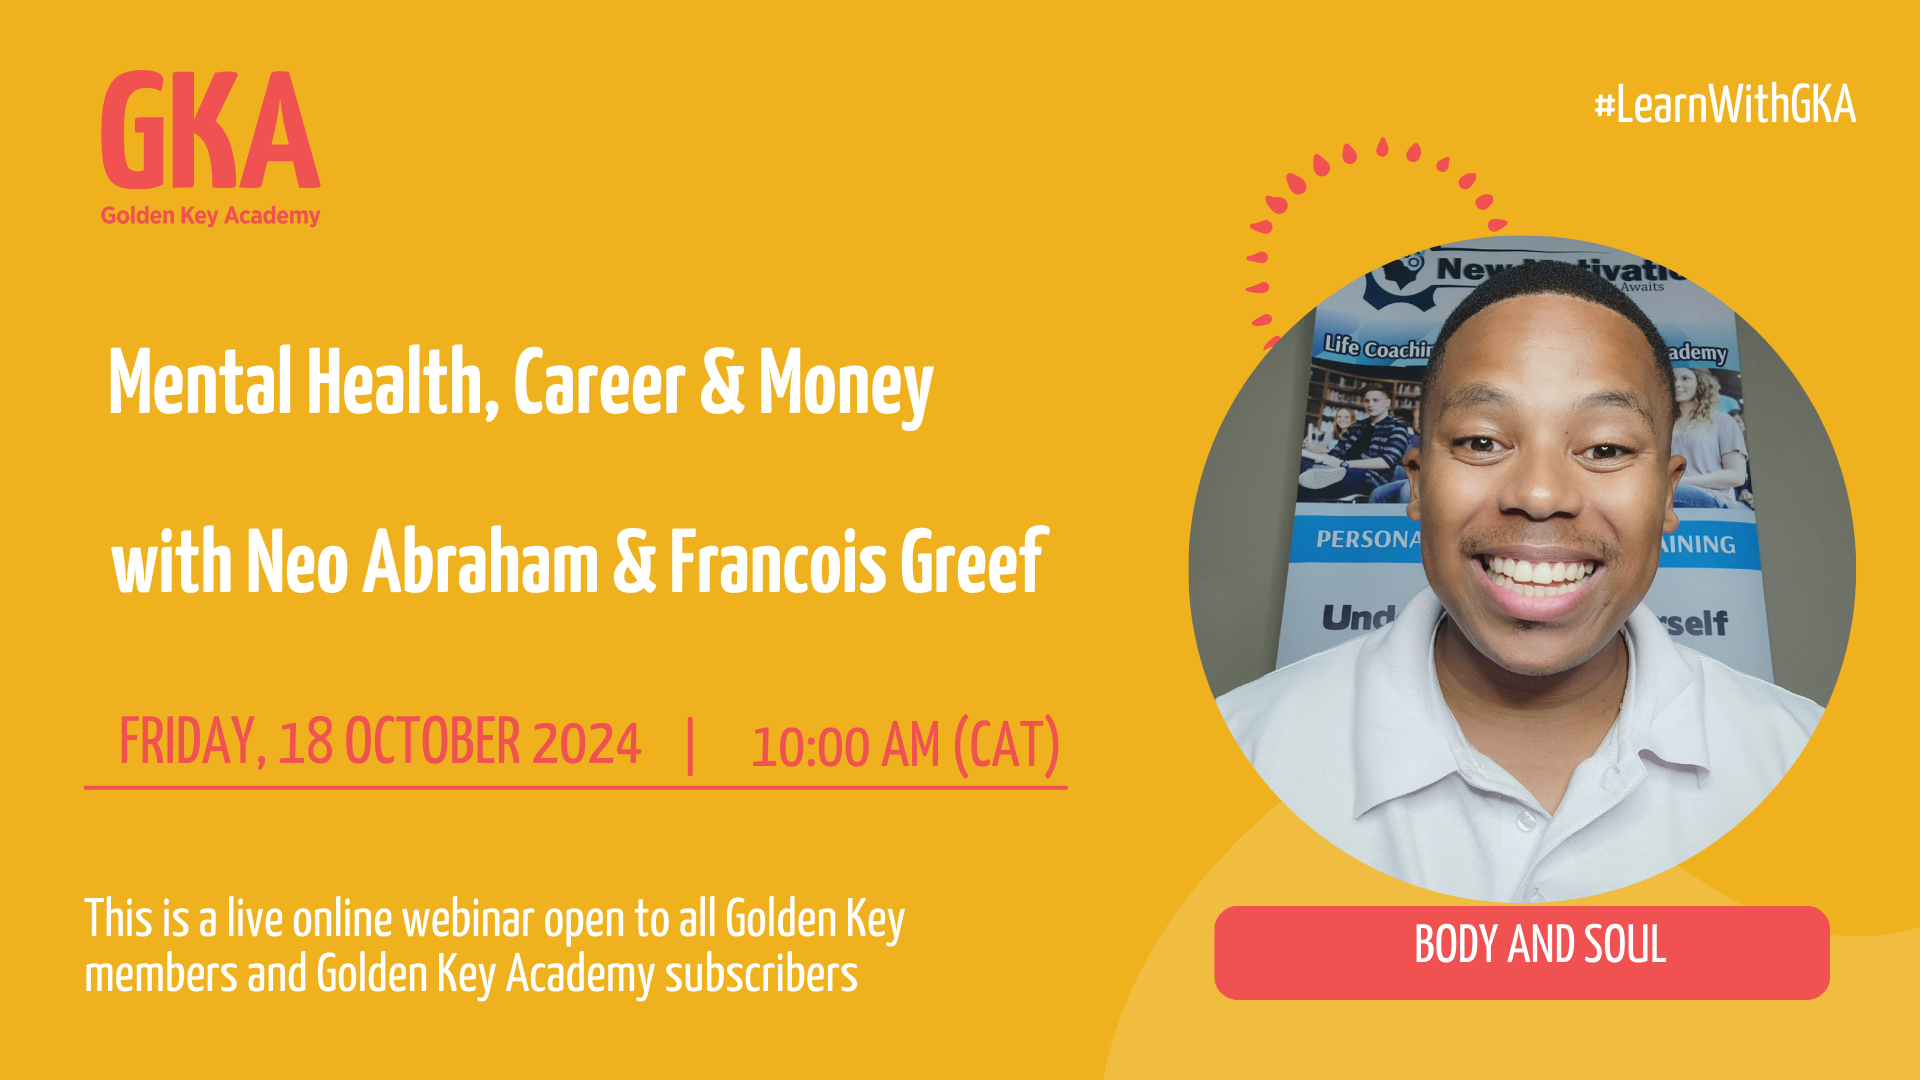 Mental Health, Career & Money with Neo Abraham & Francois Greef